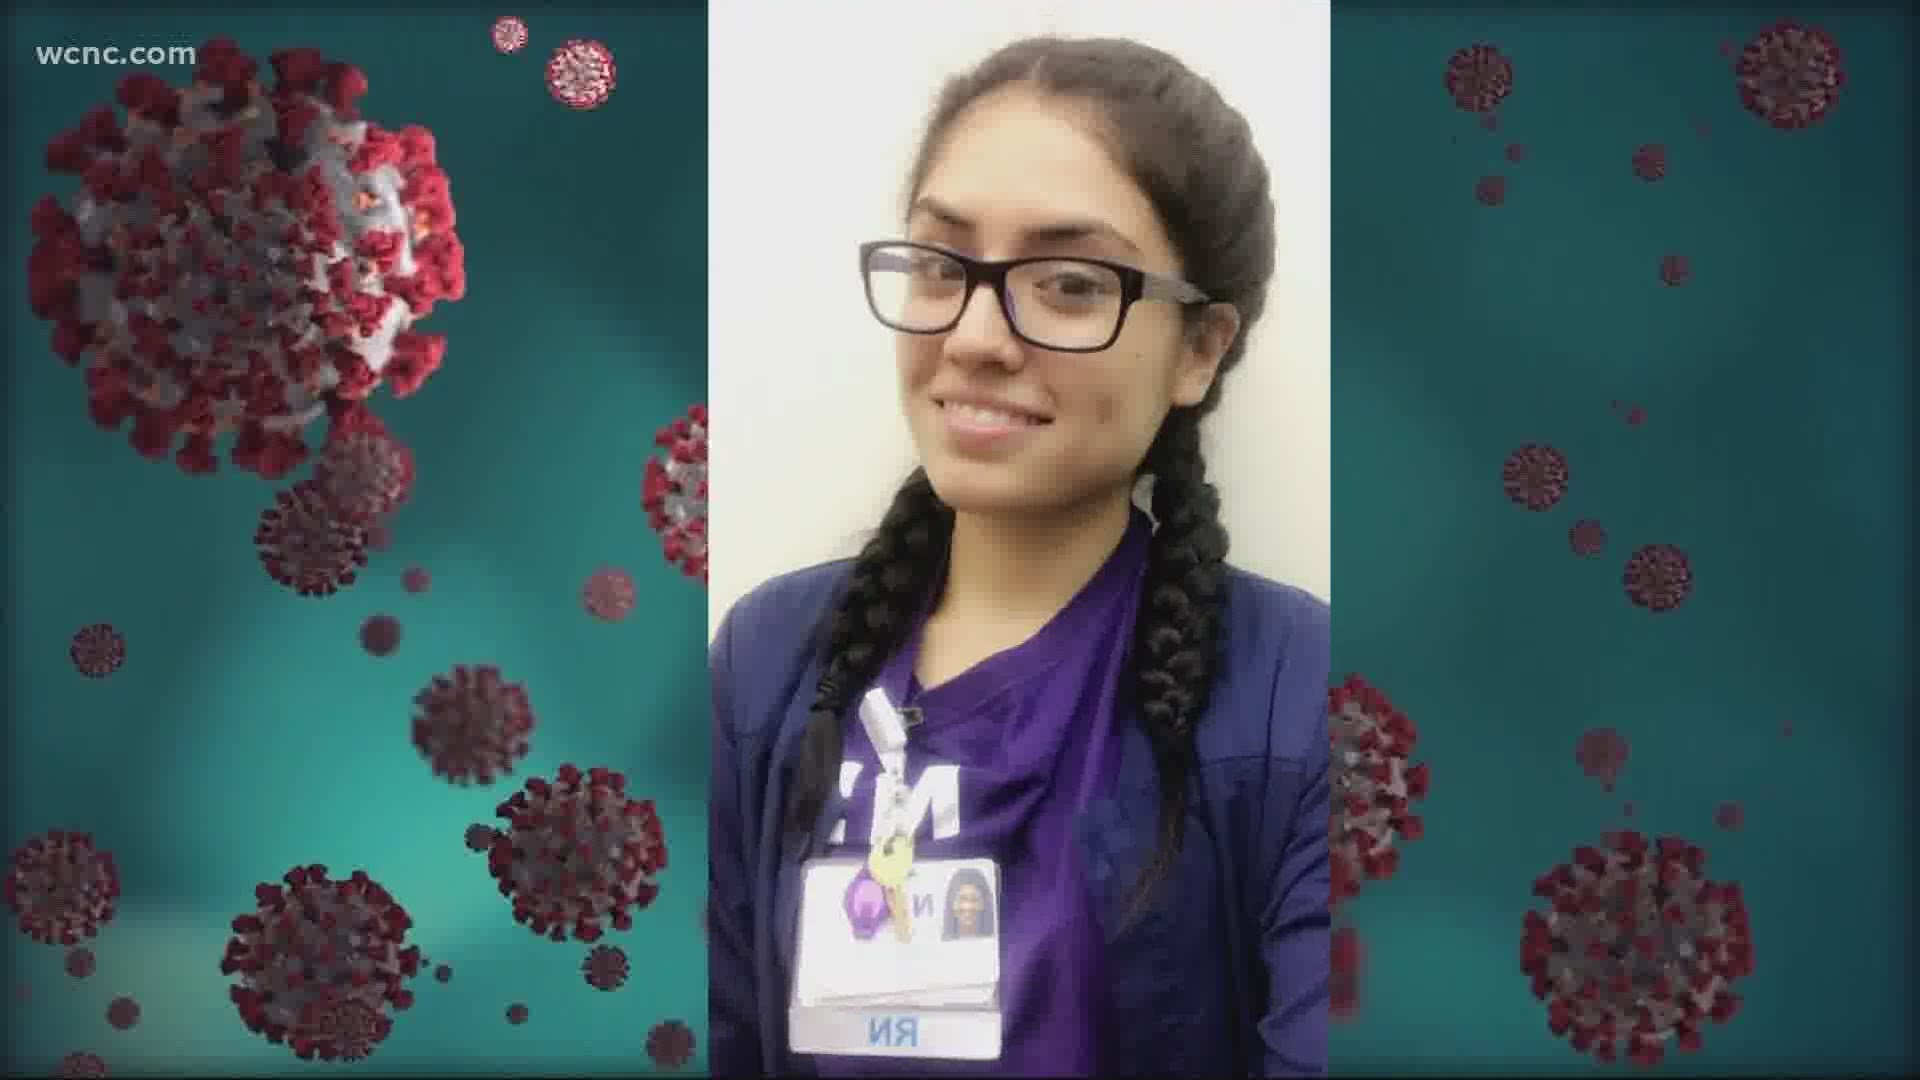 RN Diana Tejada has an invaluable set of skills as she cares for coronavirus patients.